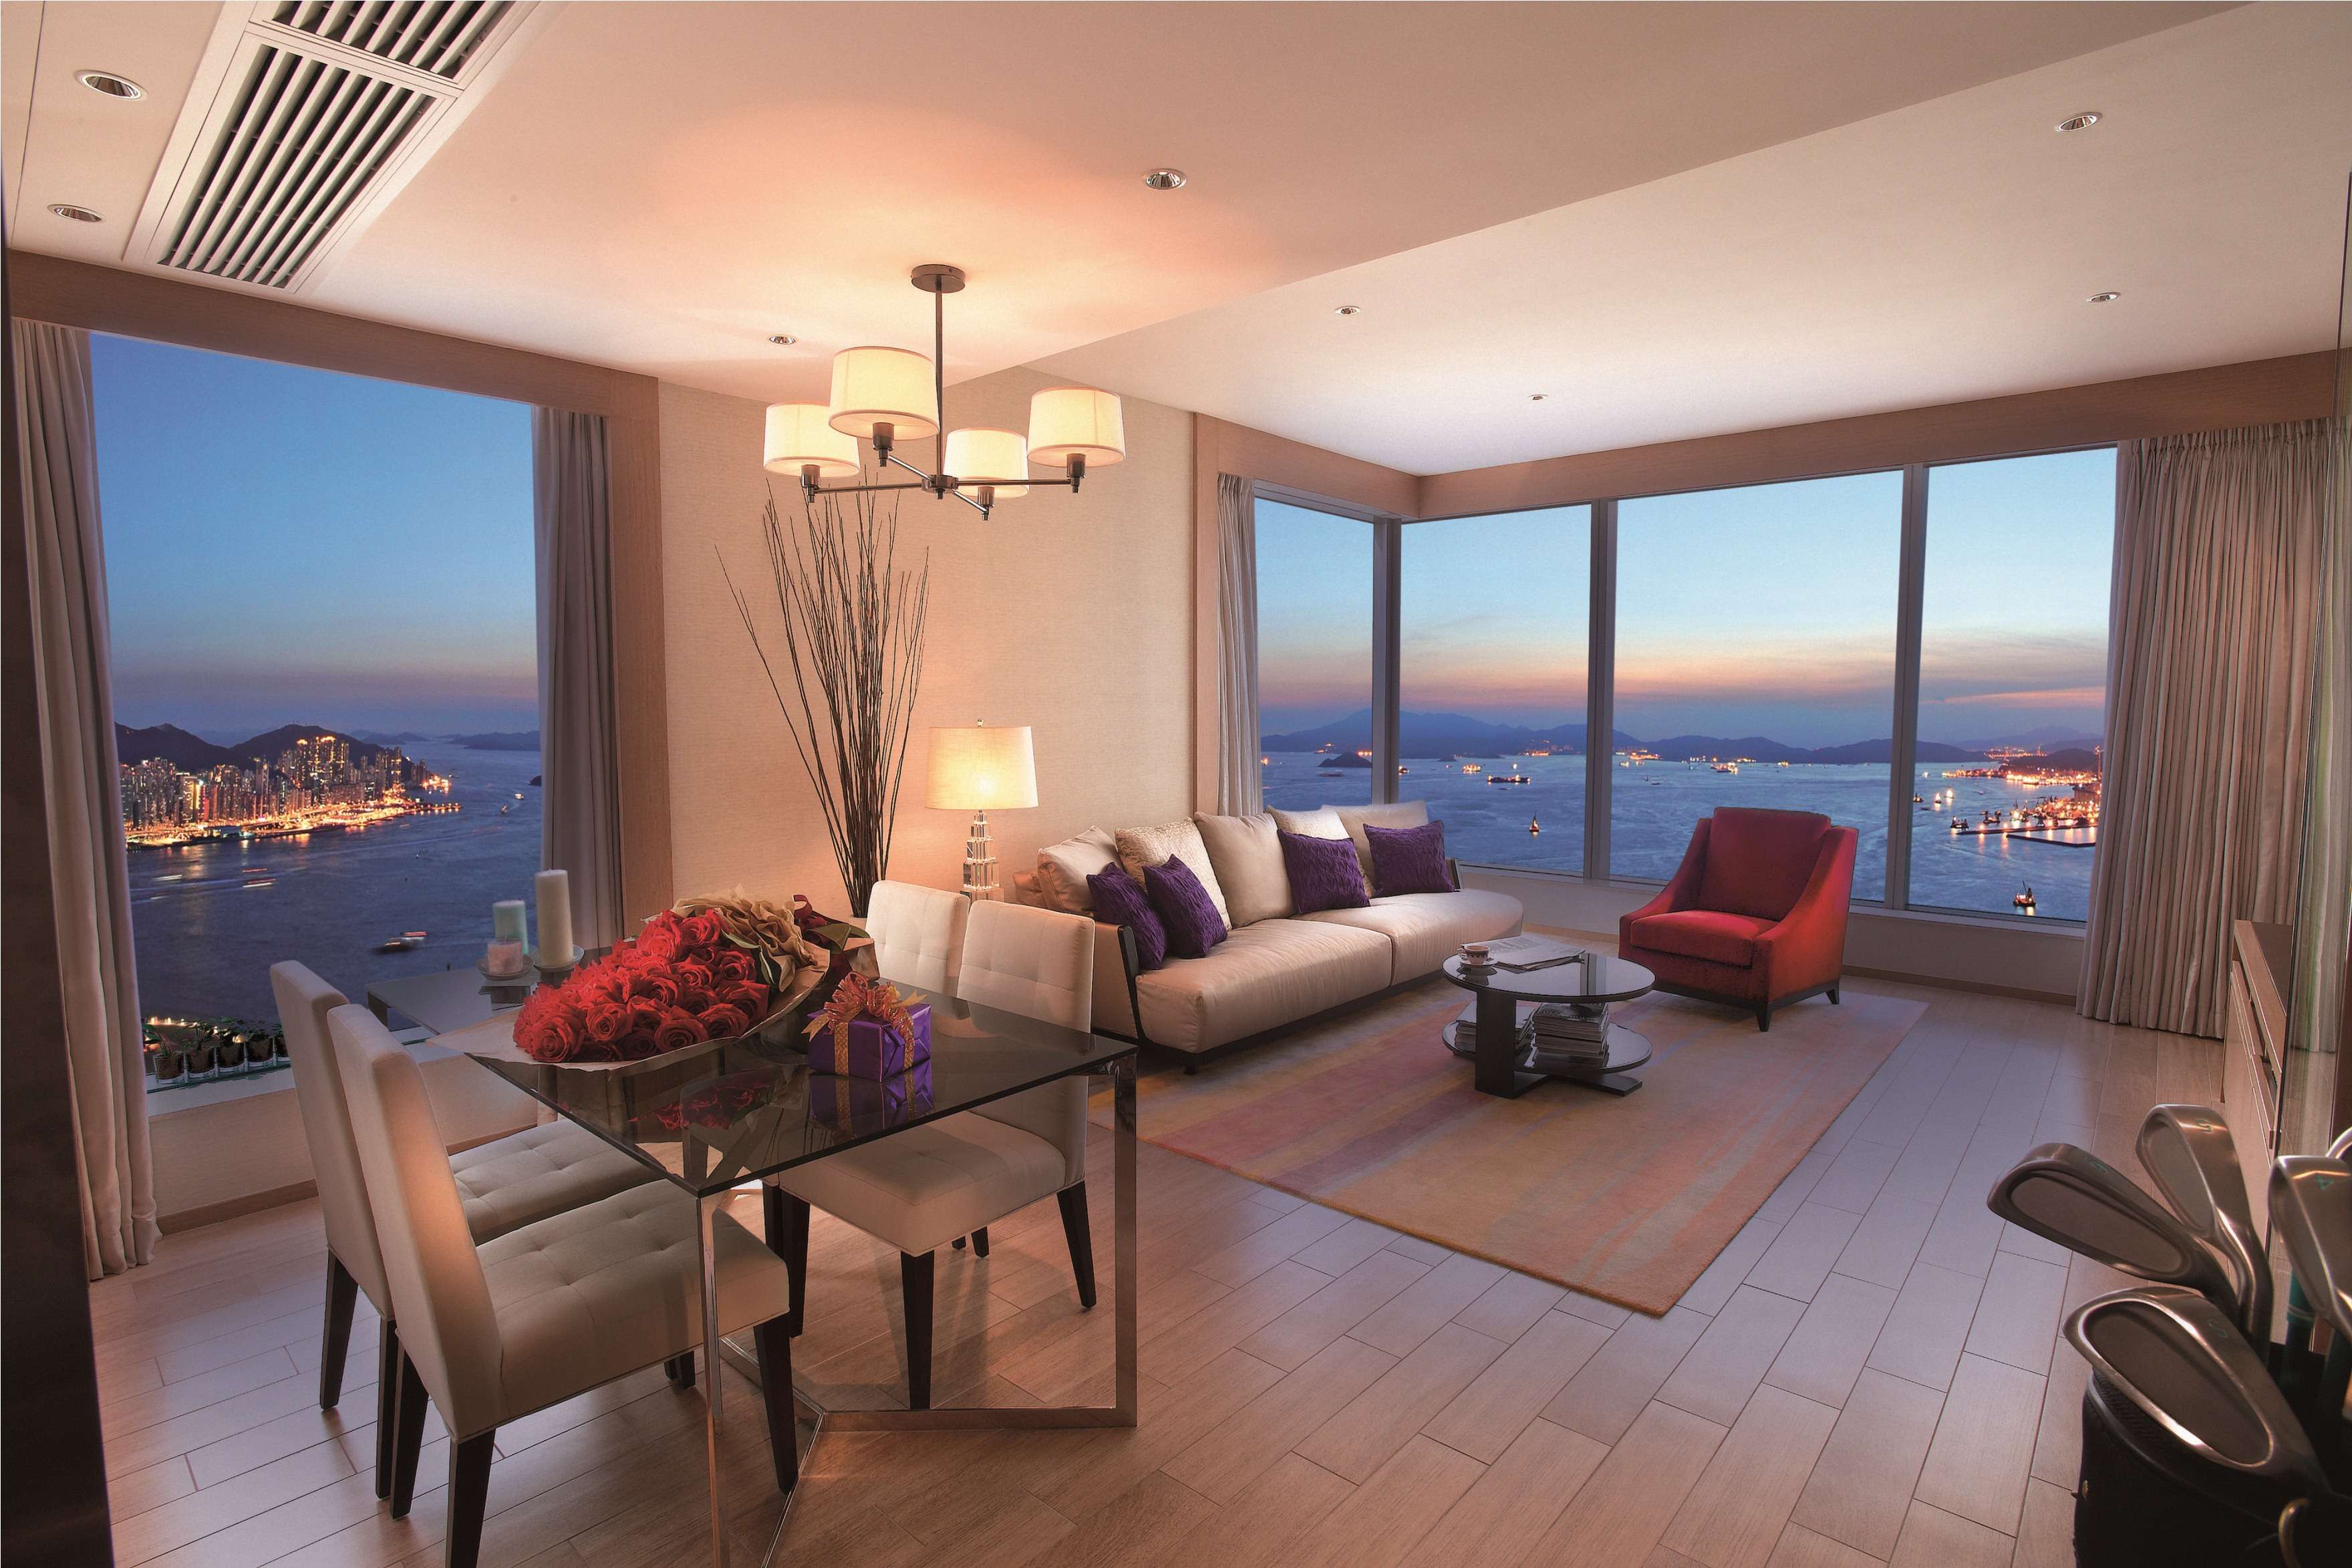 SHKP’s portfolio of luxury serviced apartment properties includes The HarbourView Place (above), Four Seasons Place and Vega Suites.